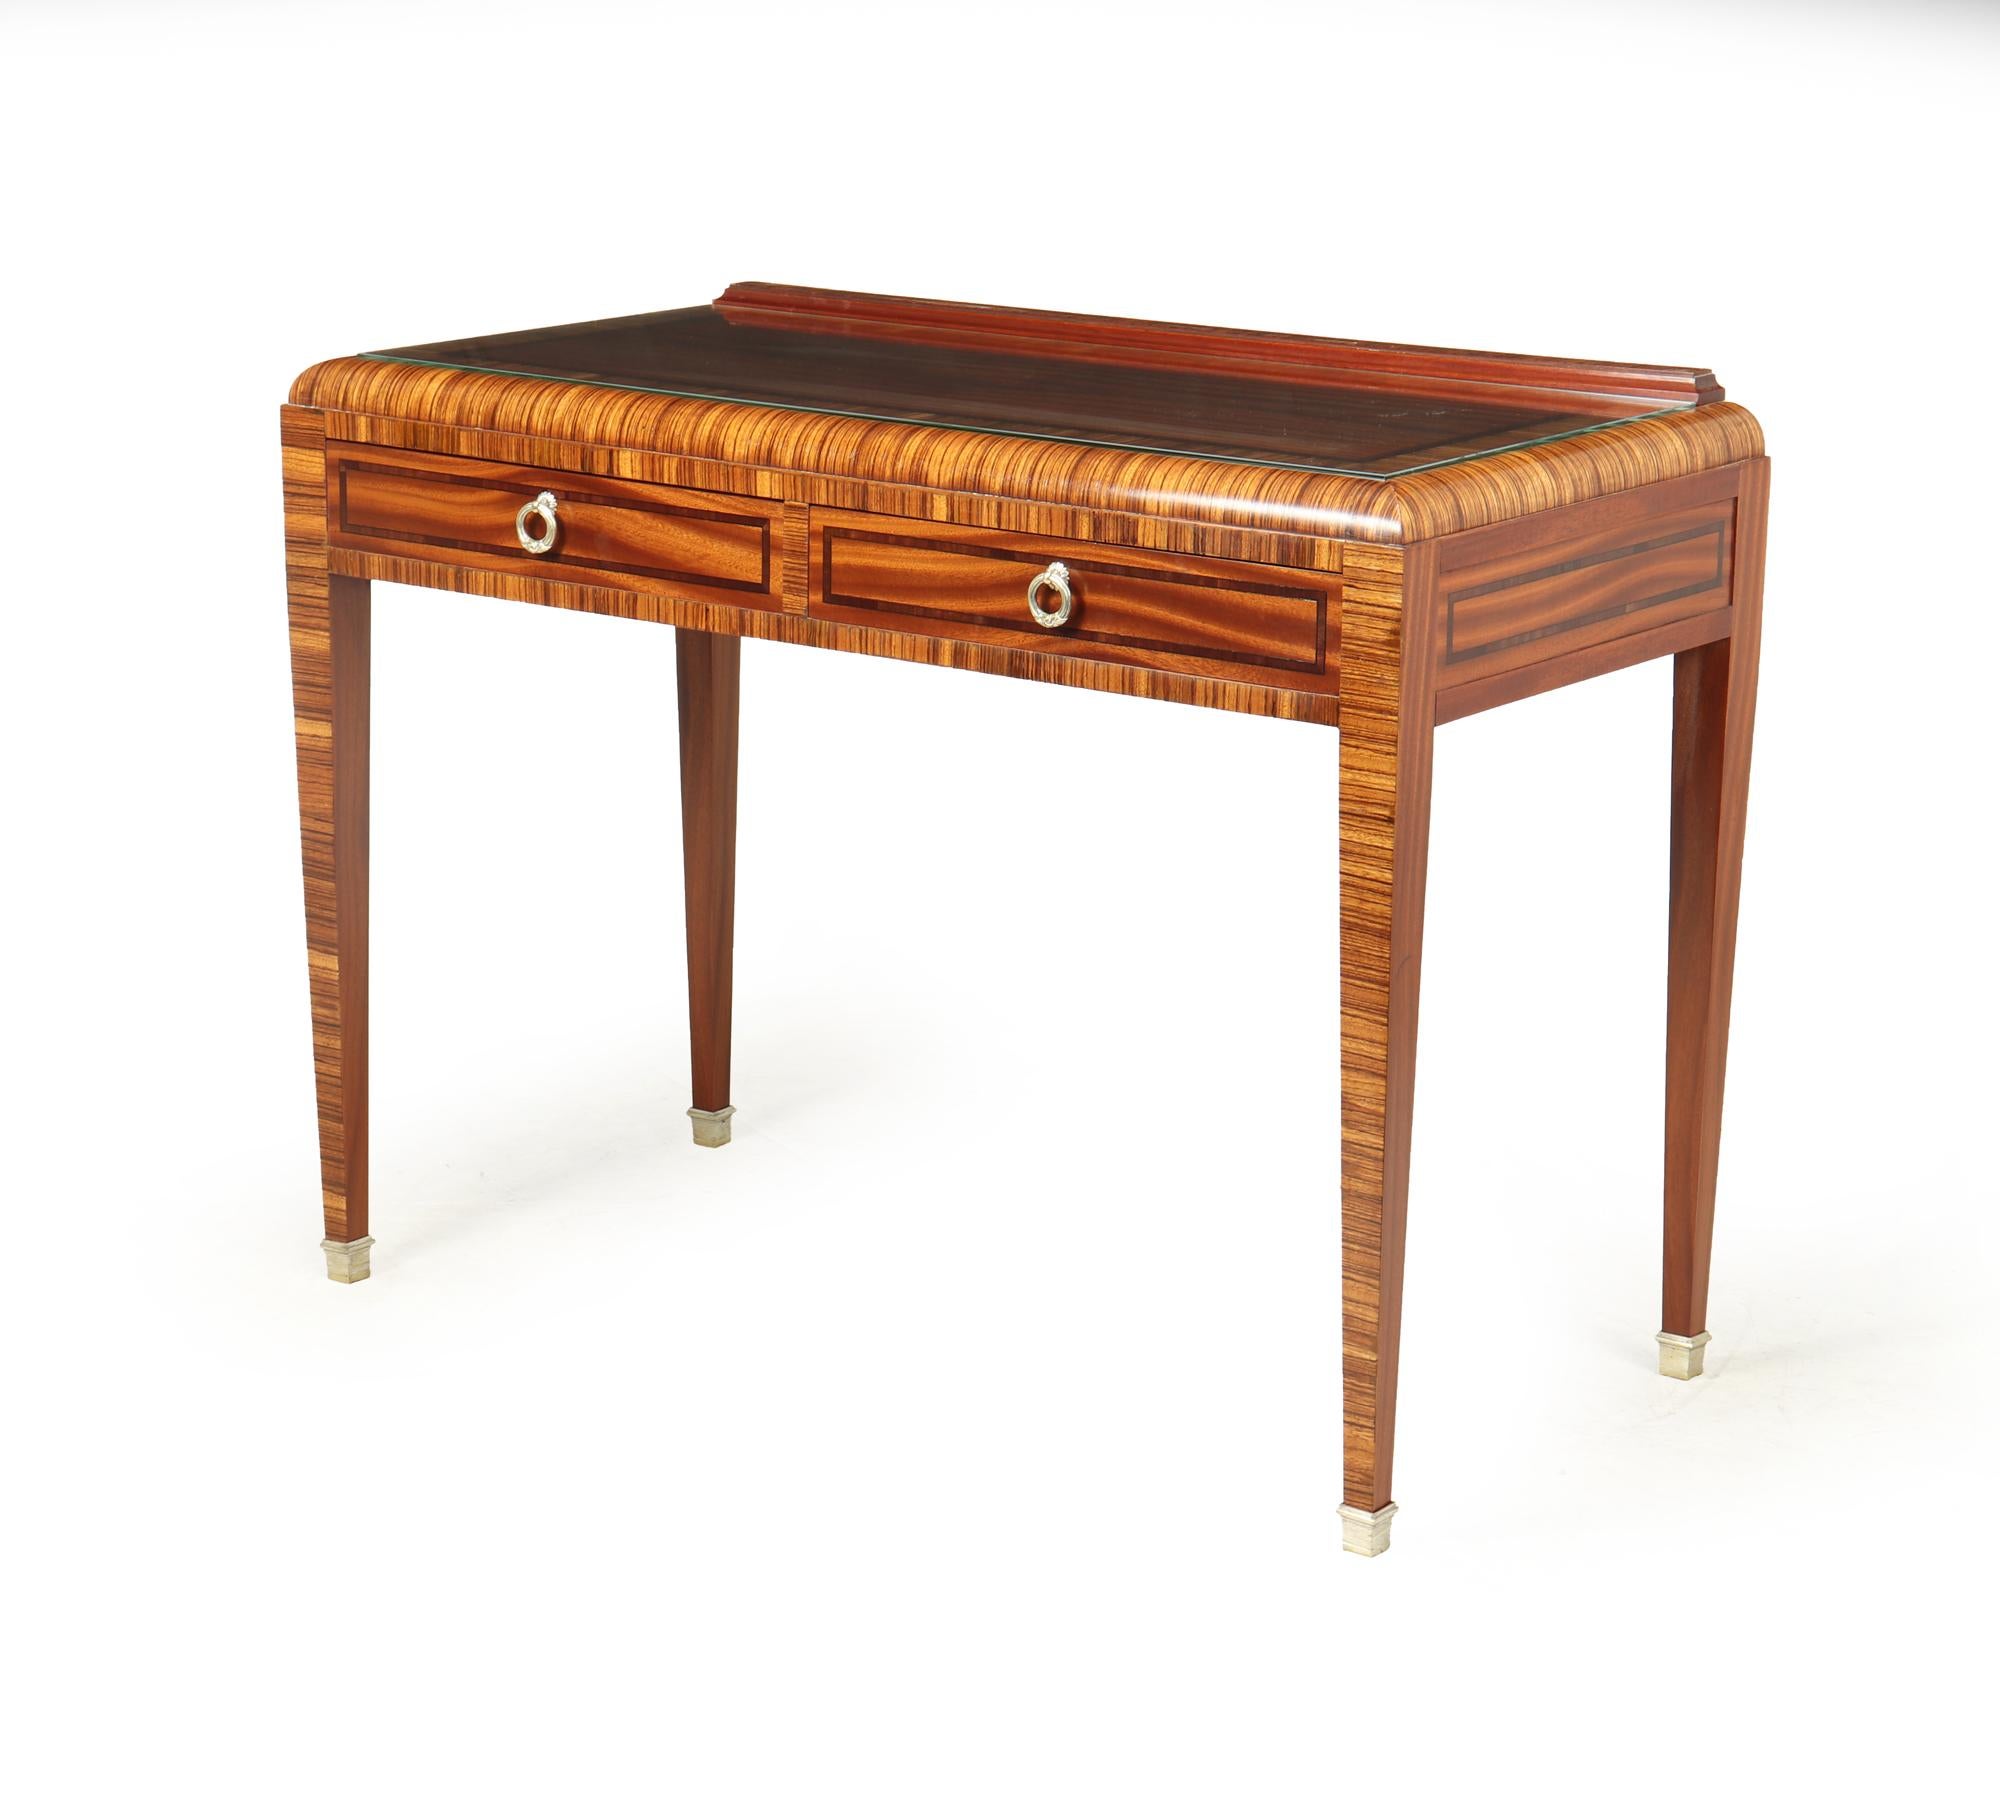 A French Art Deco Writing table produced in zebrano and Sapele with ebony inlay in France in the 1930’s, it has bronze hoop drop handles and silver gilt bronze sabots it has a set in glass plate top

Age: 1920

Style: Art Deco

Material: